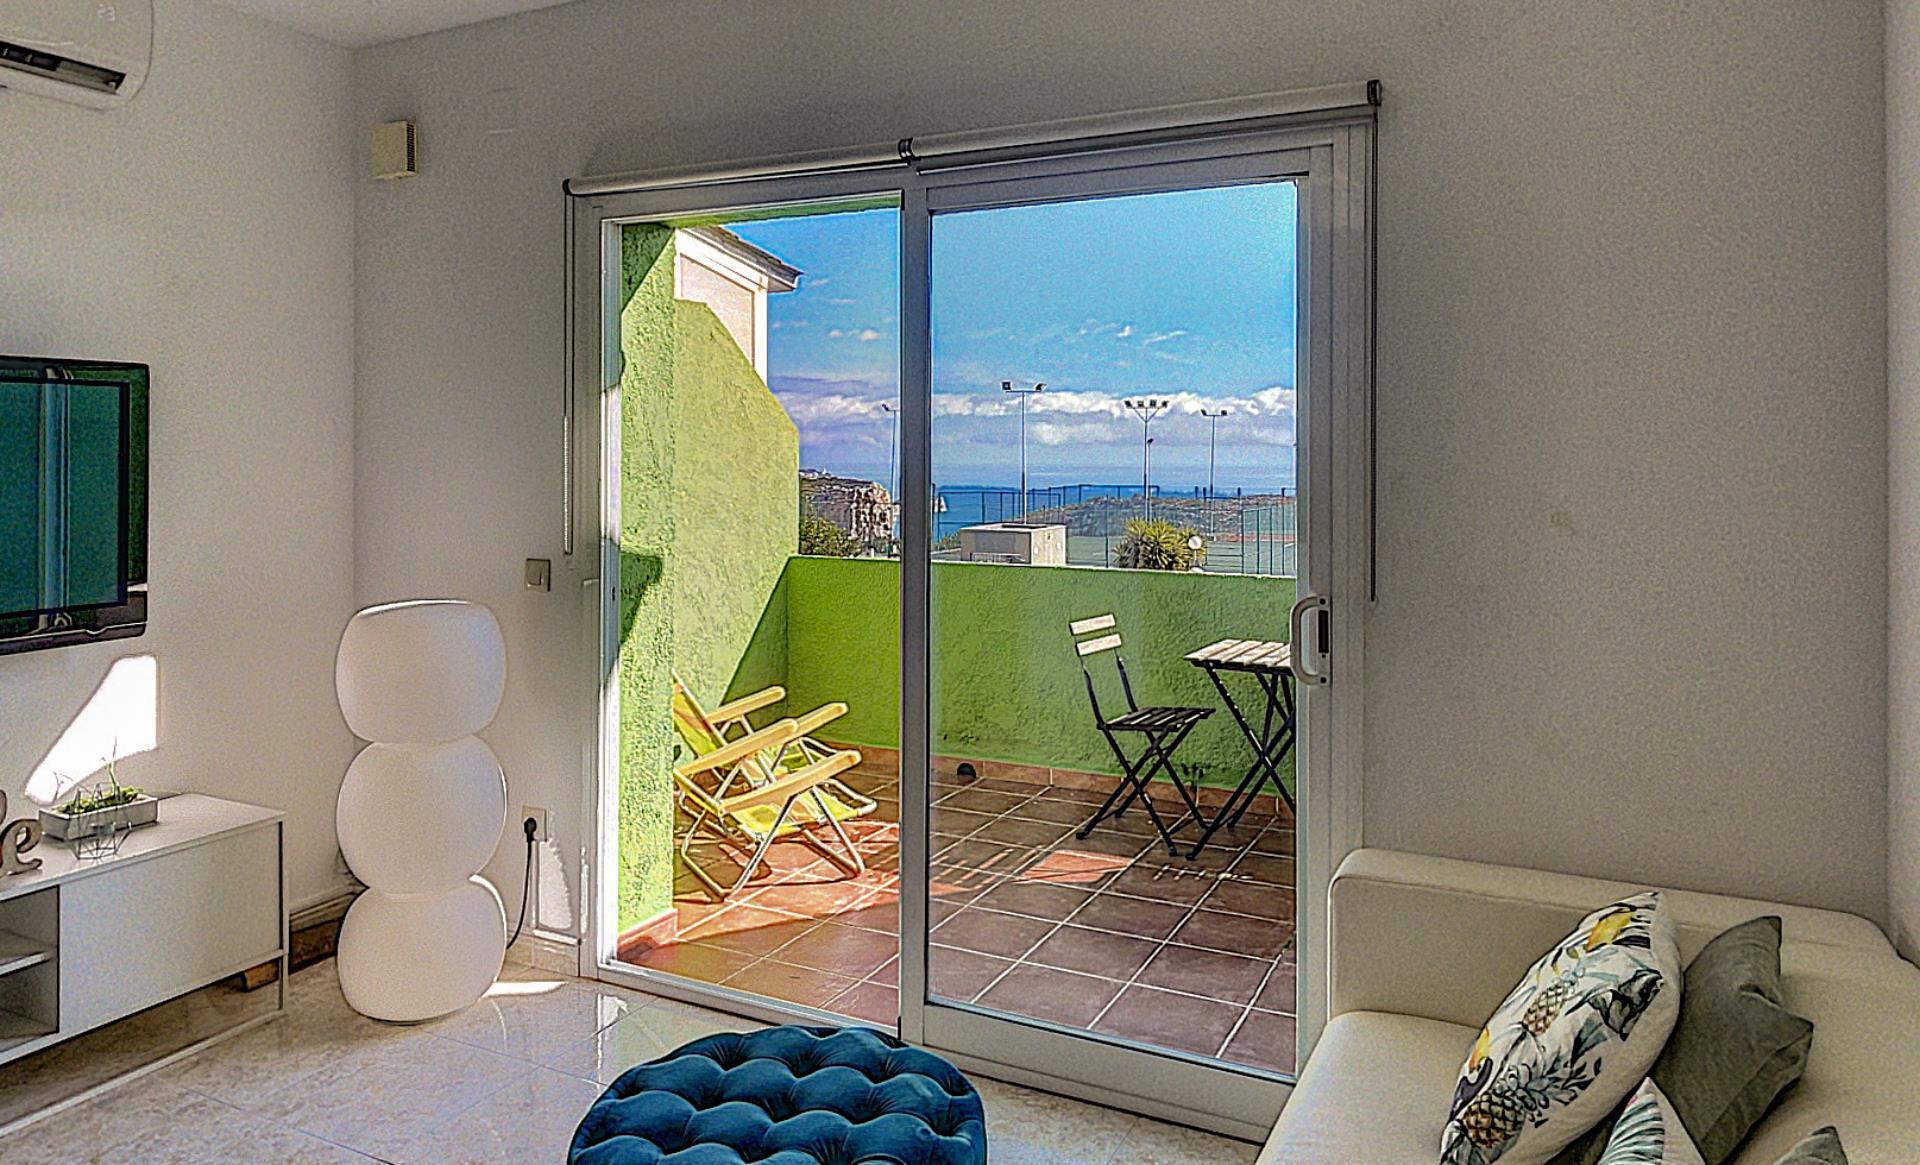 Featuring sea views, this apartment offers a sun terrace